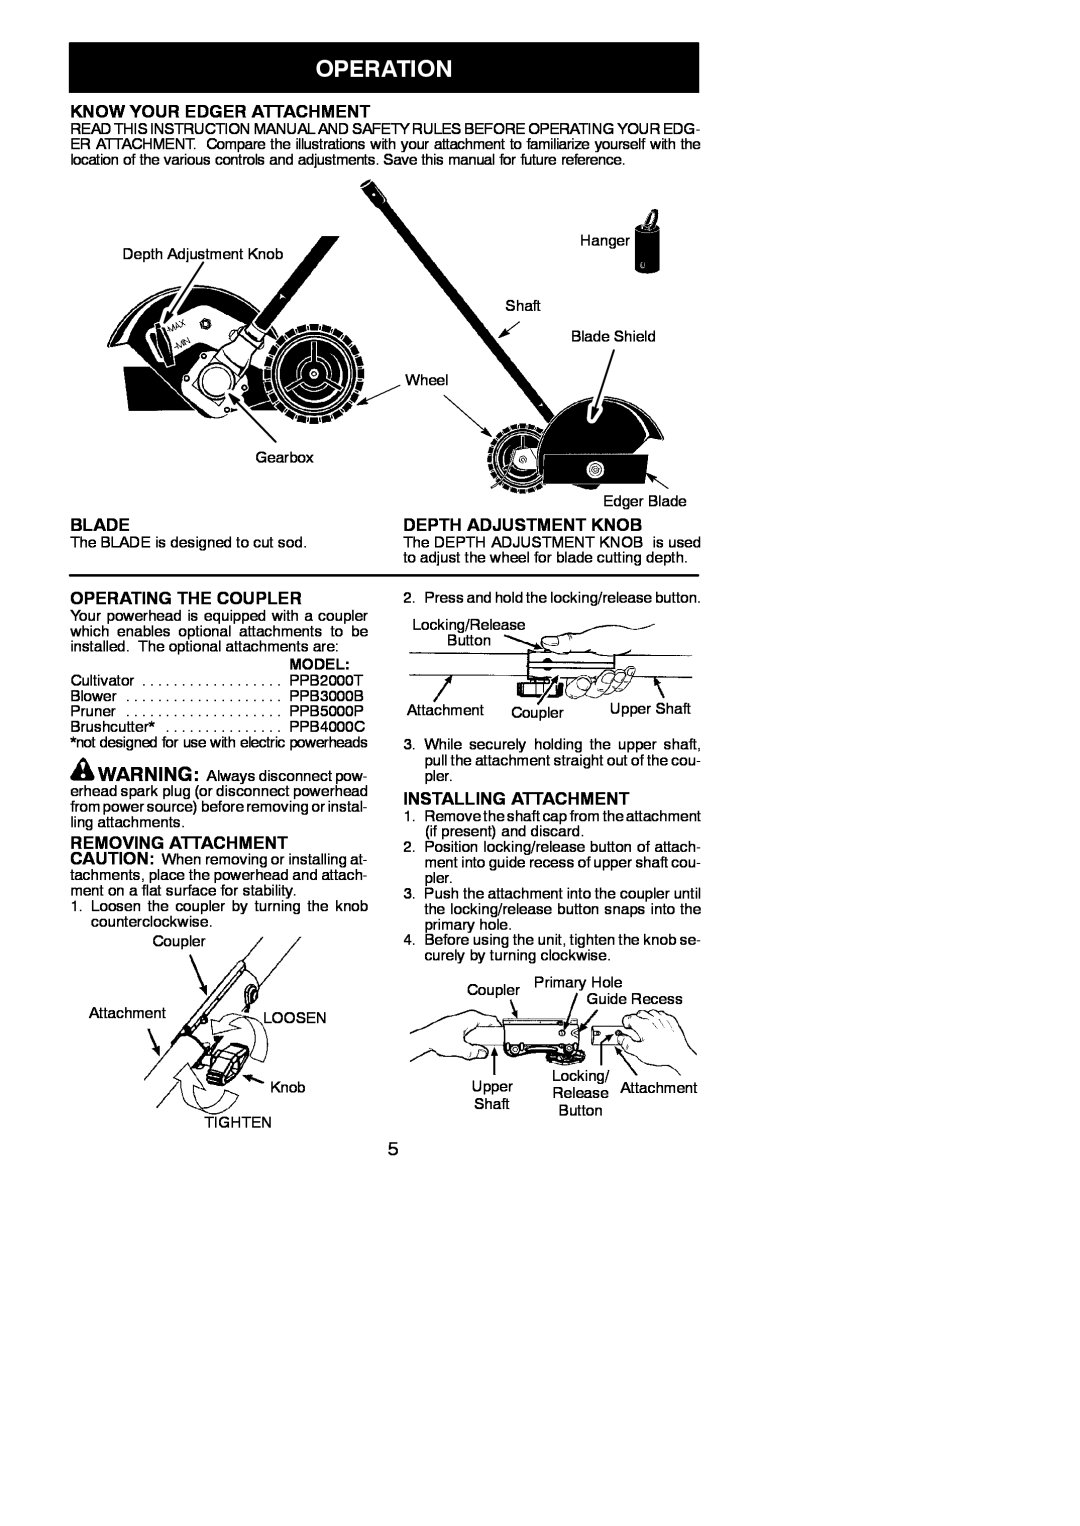 Poulan 545167665 Operation, Know Your Edger Attachment, Blade, Depth Adjustment Knob, Operating The Coupler, Model 